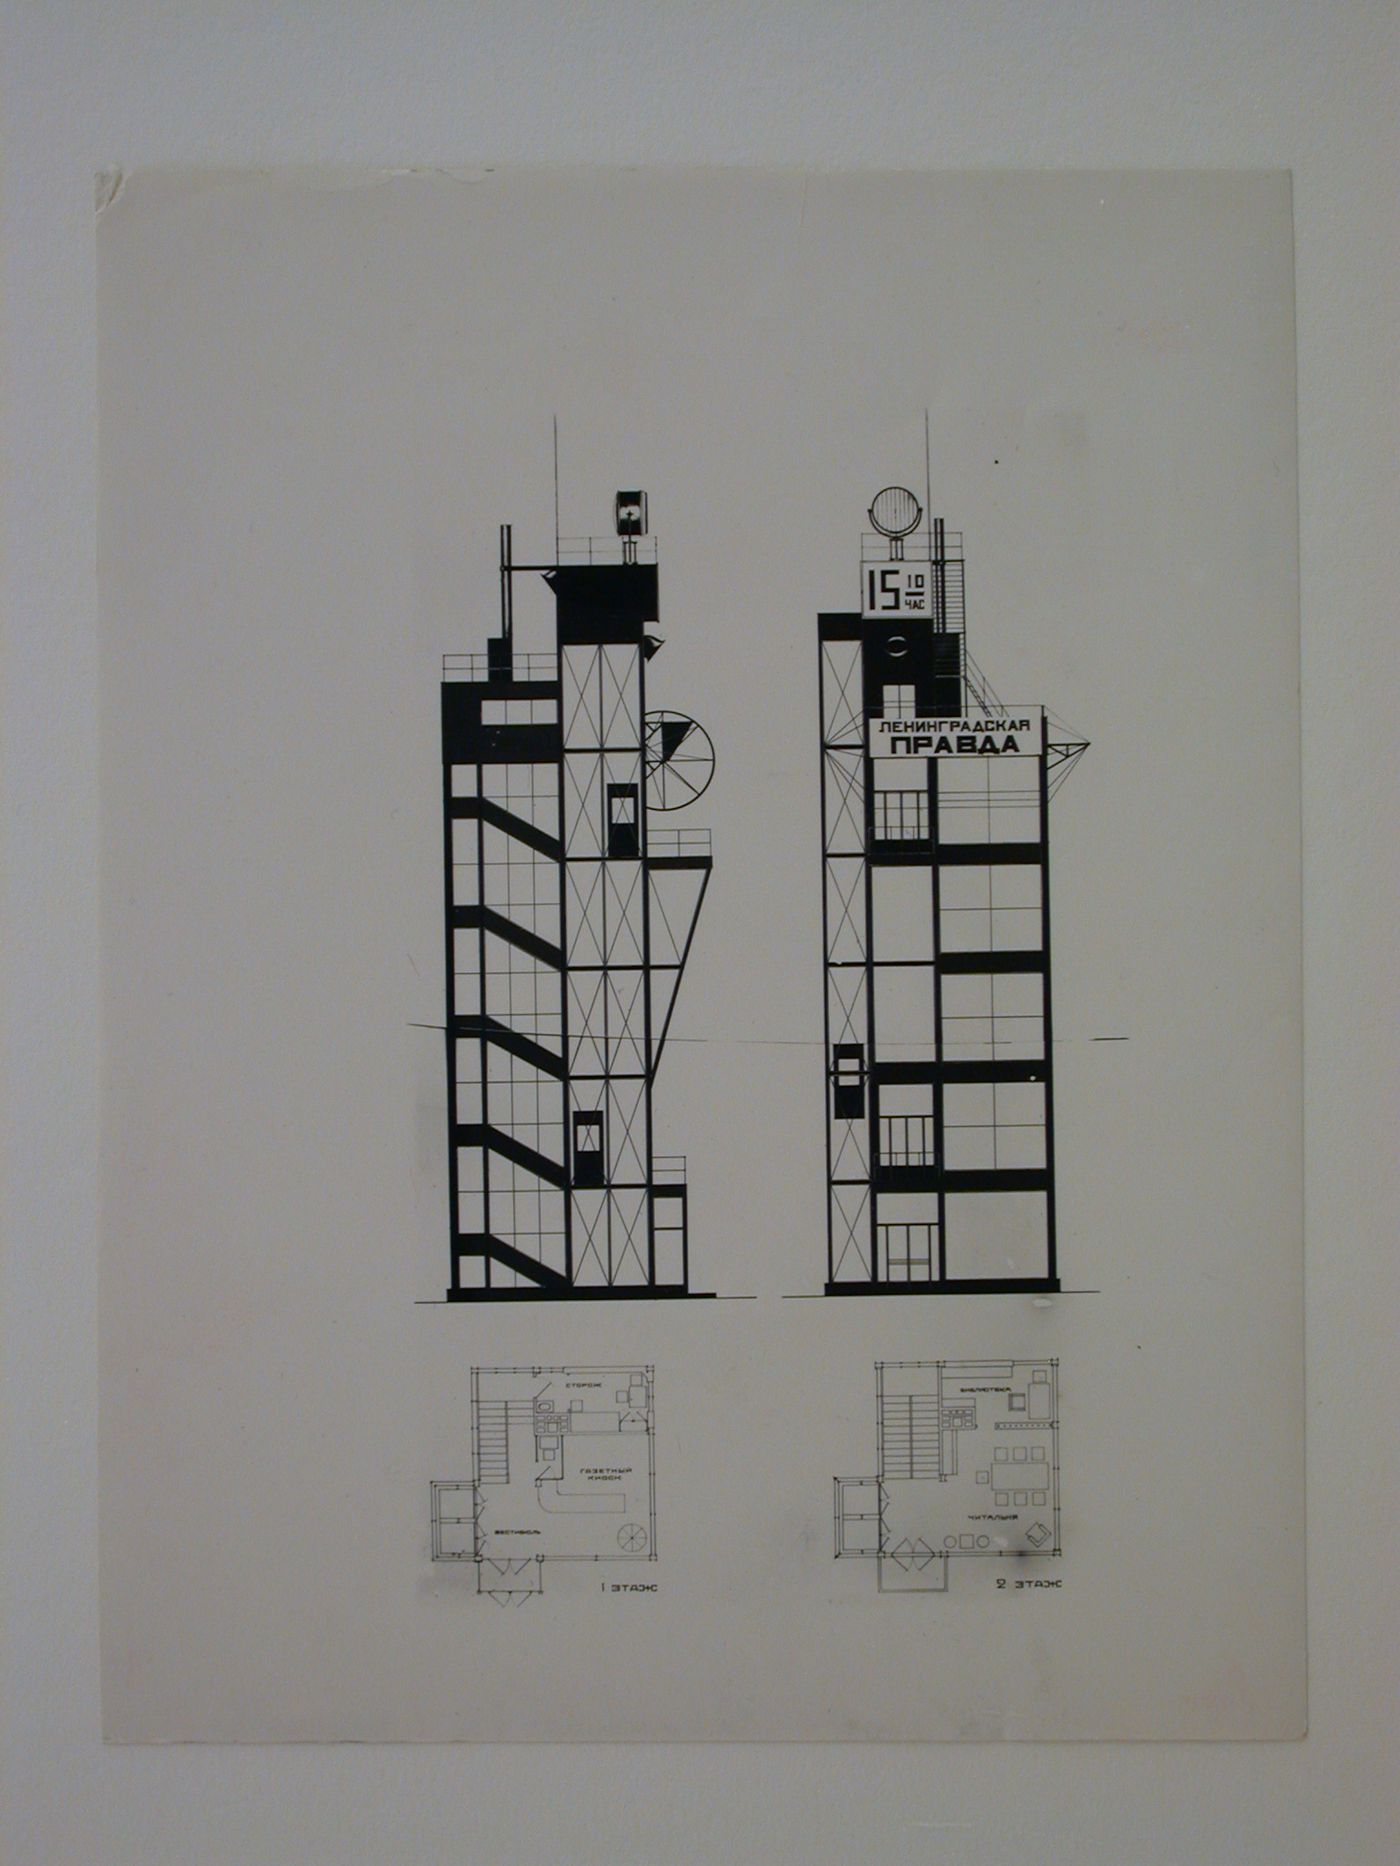 Photographs of elevations and plans for the Leningrad Pravda Building, Moscow